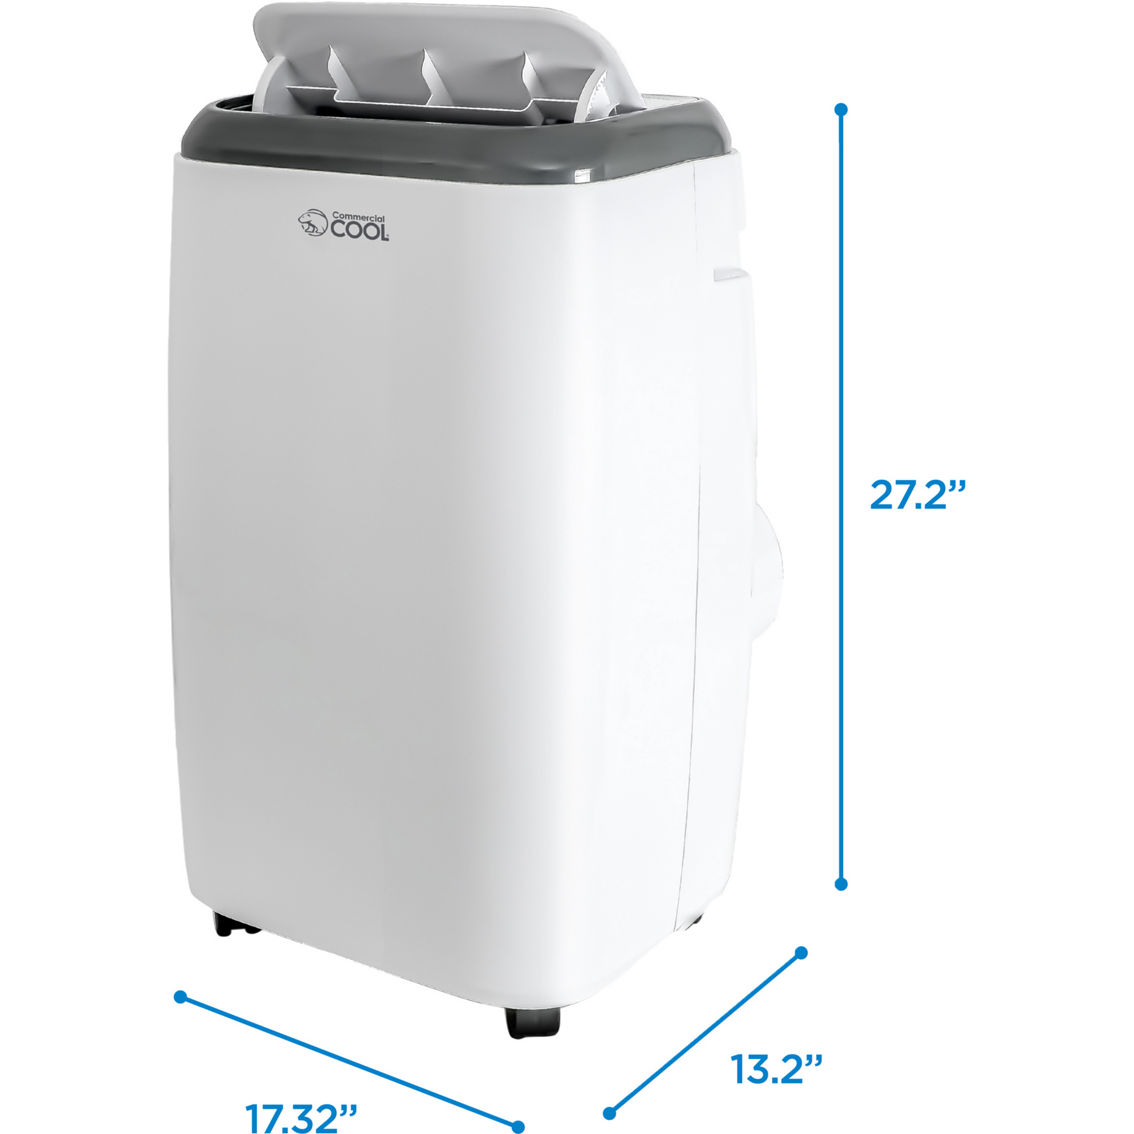 Commercial Cool Portable Air Conditioner with Remote Control, 14000 BTU with Heat - Image 2 of 7